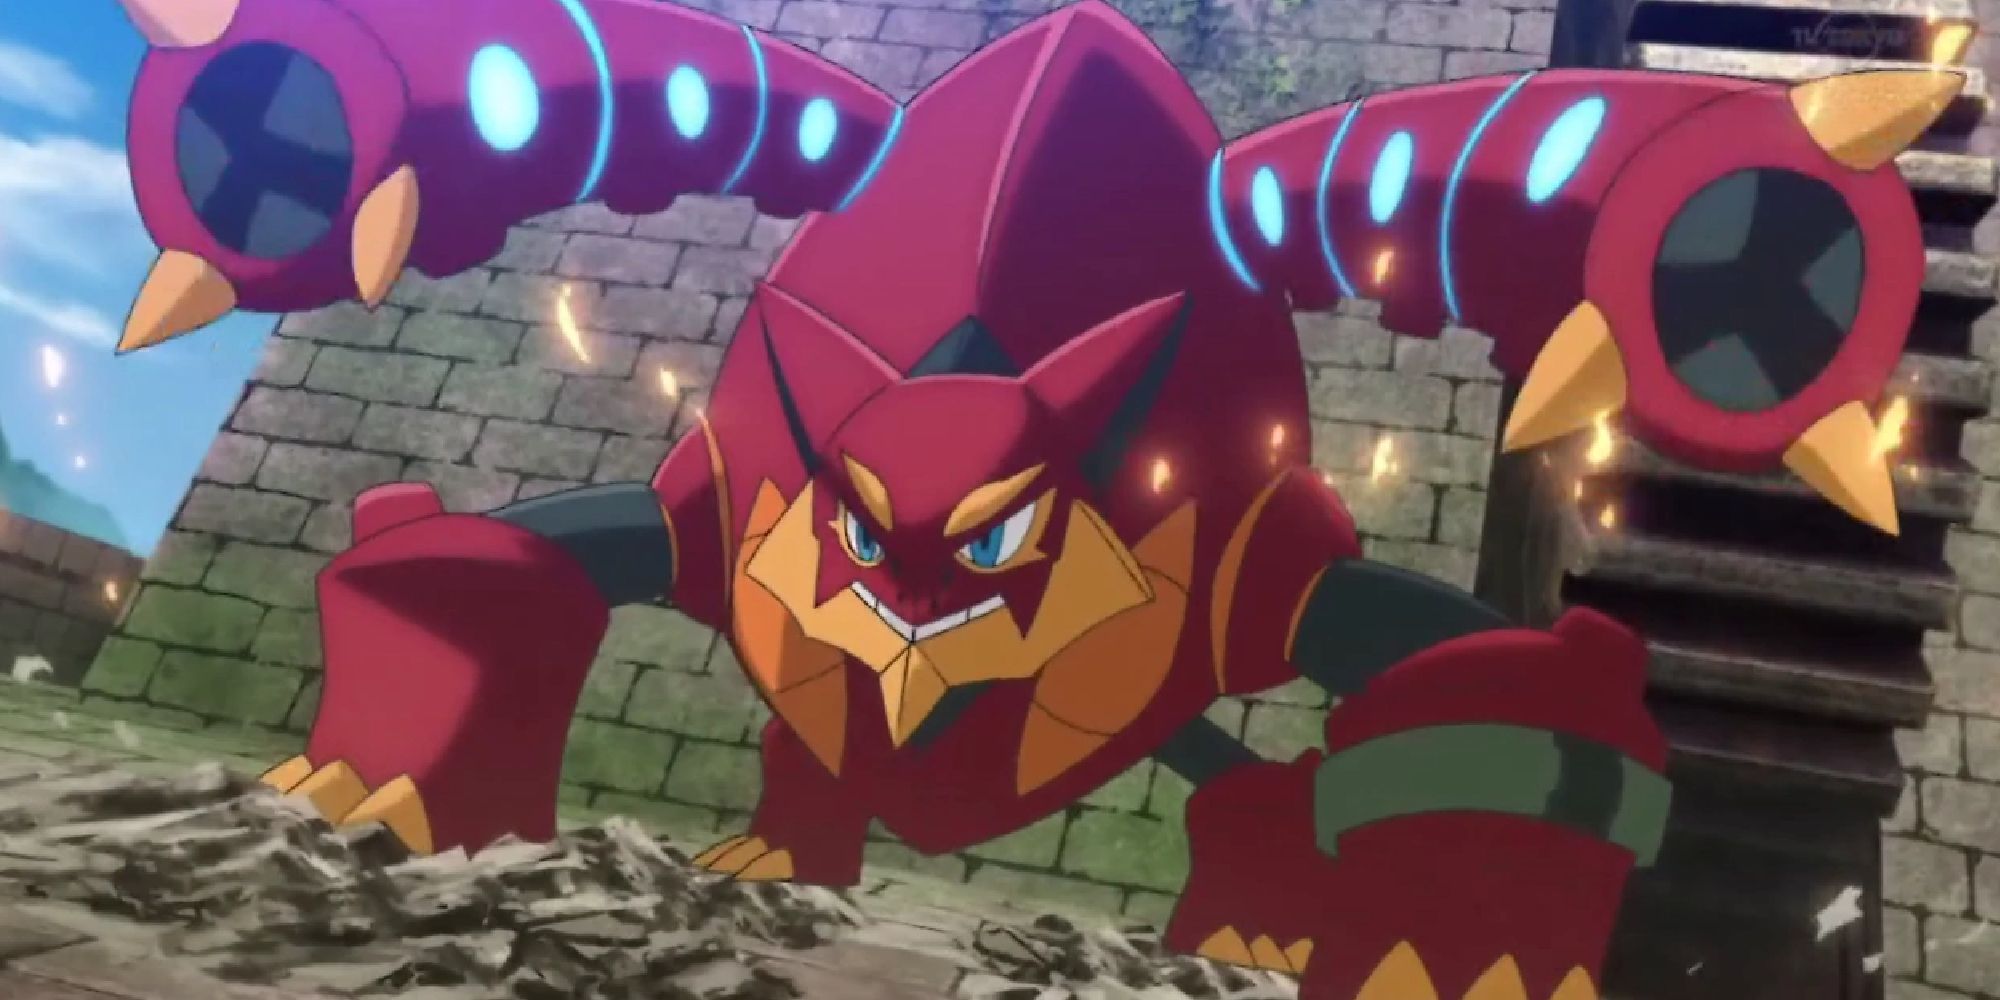 Volcanion appearing in a Pokemon movie